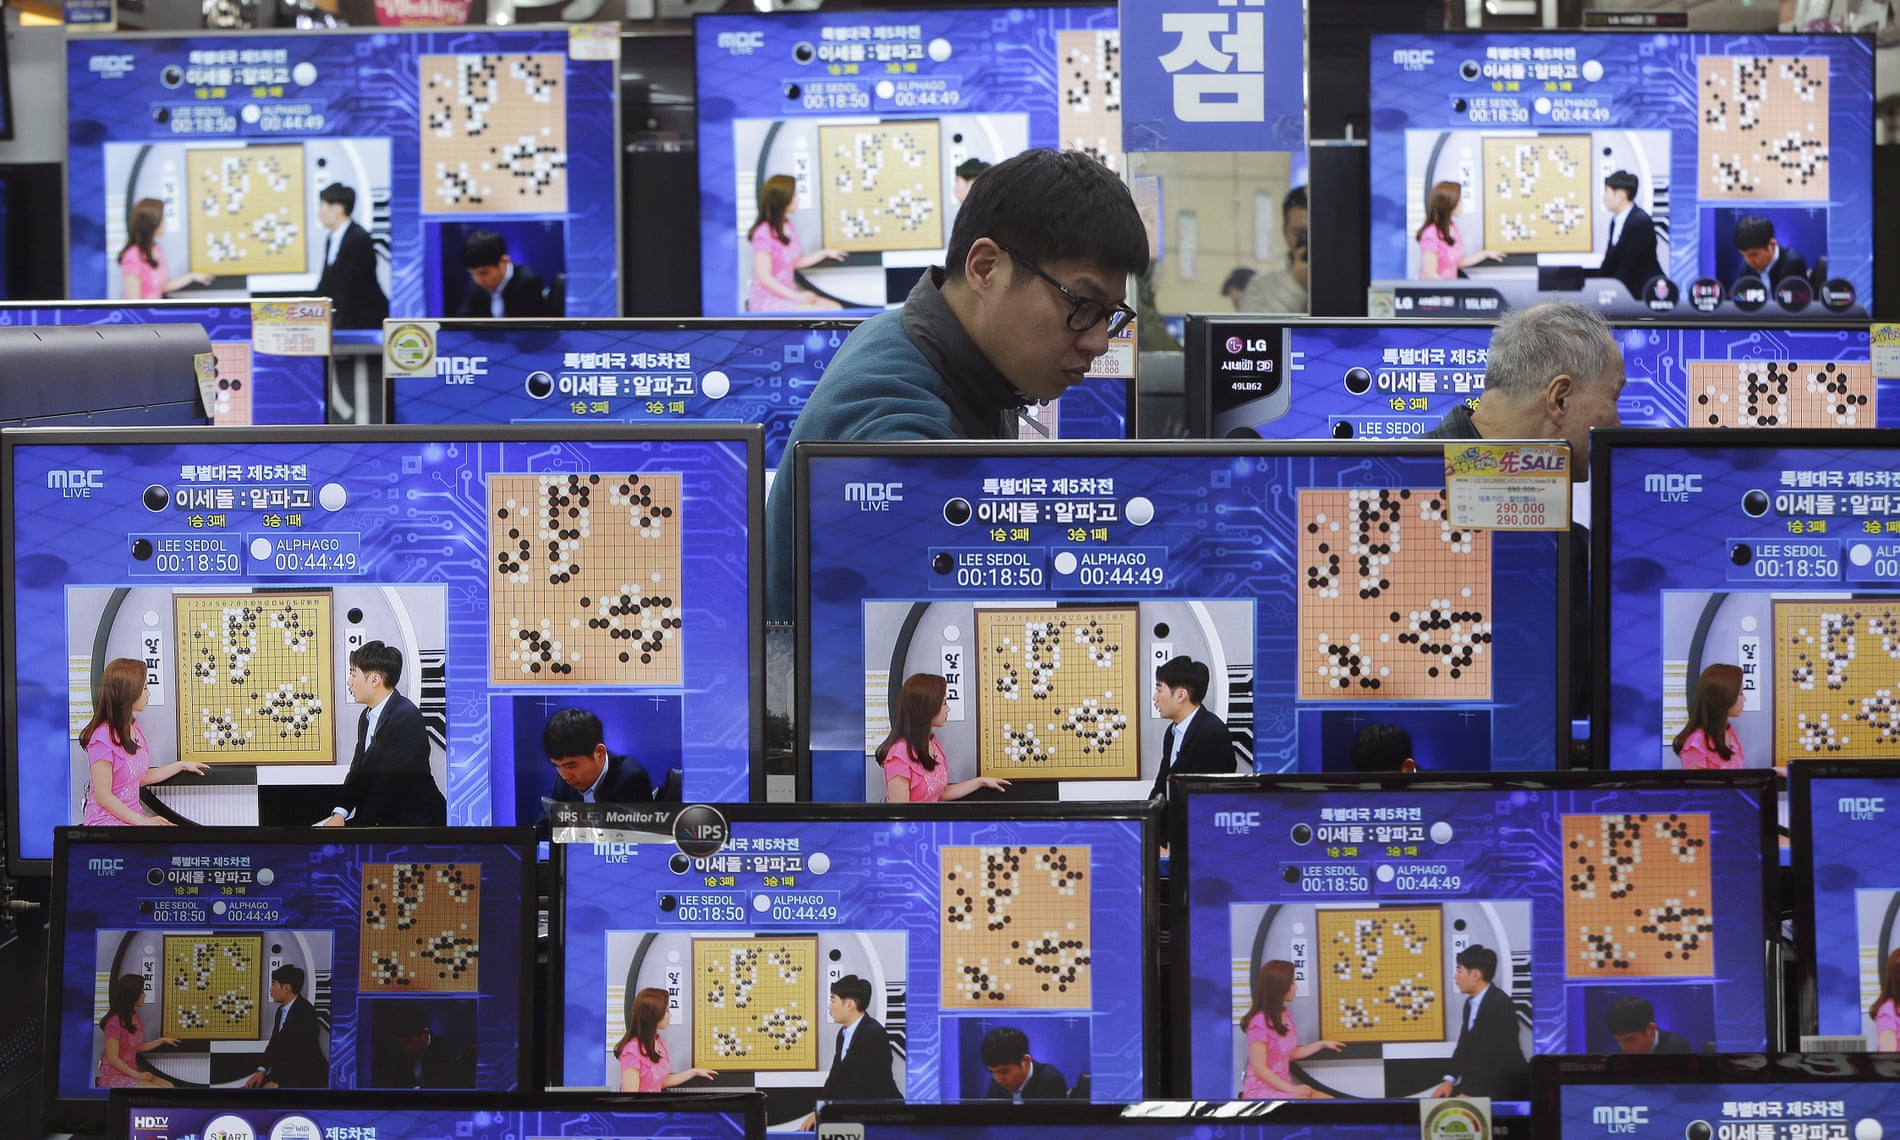 TV screens show the live broadcast of the Google DeepMind Challenge Match between Google’s artificial intelligence program, AlphaGo, and South Korean professional Go player Lee Sedol, at the Yongsan Electronic store in Seoul, South Korea.